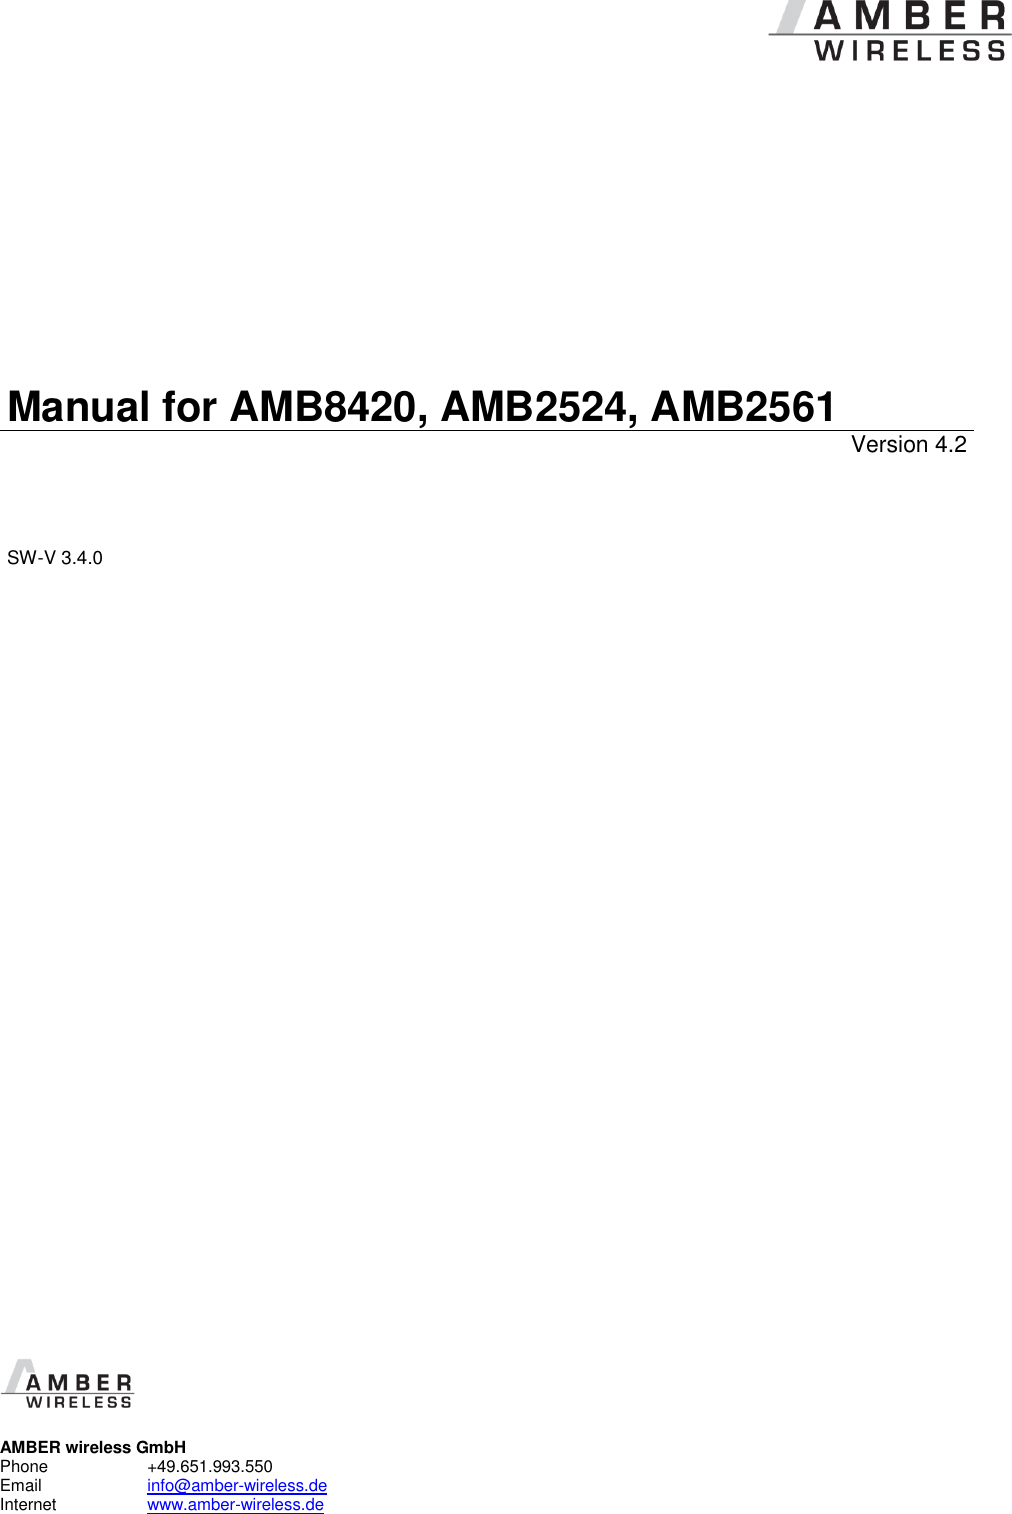            Manual for AMB8420, AMB2524, AMB2561 Version 4.2 SW-V 3.4.0                                     AMBER wireless GmbH Phone    +49.651.993.550  Email    info@amber-wireless.de Internet    www.amber-wireless.de 